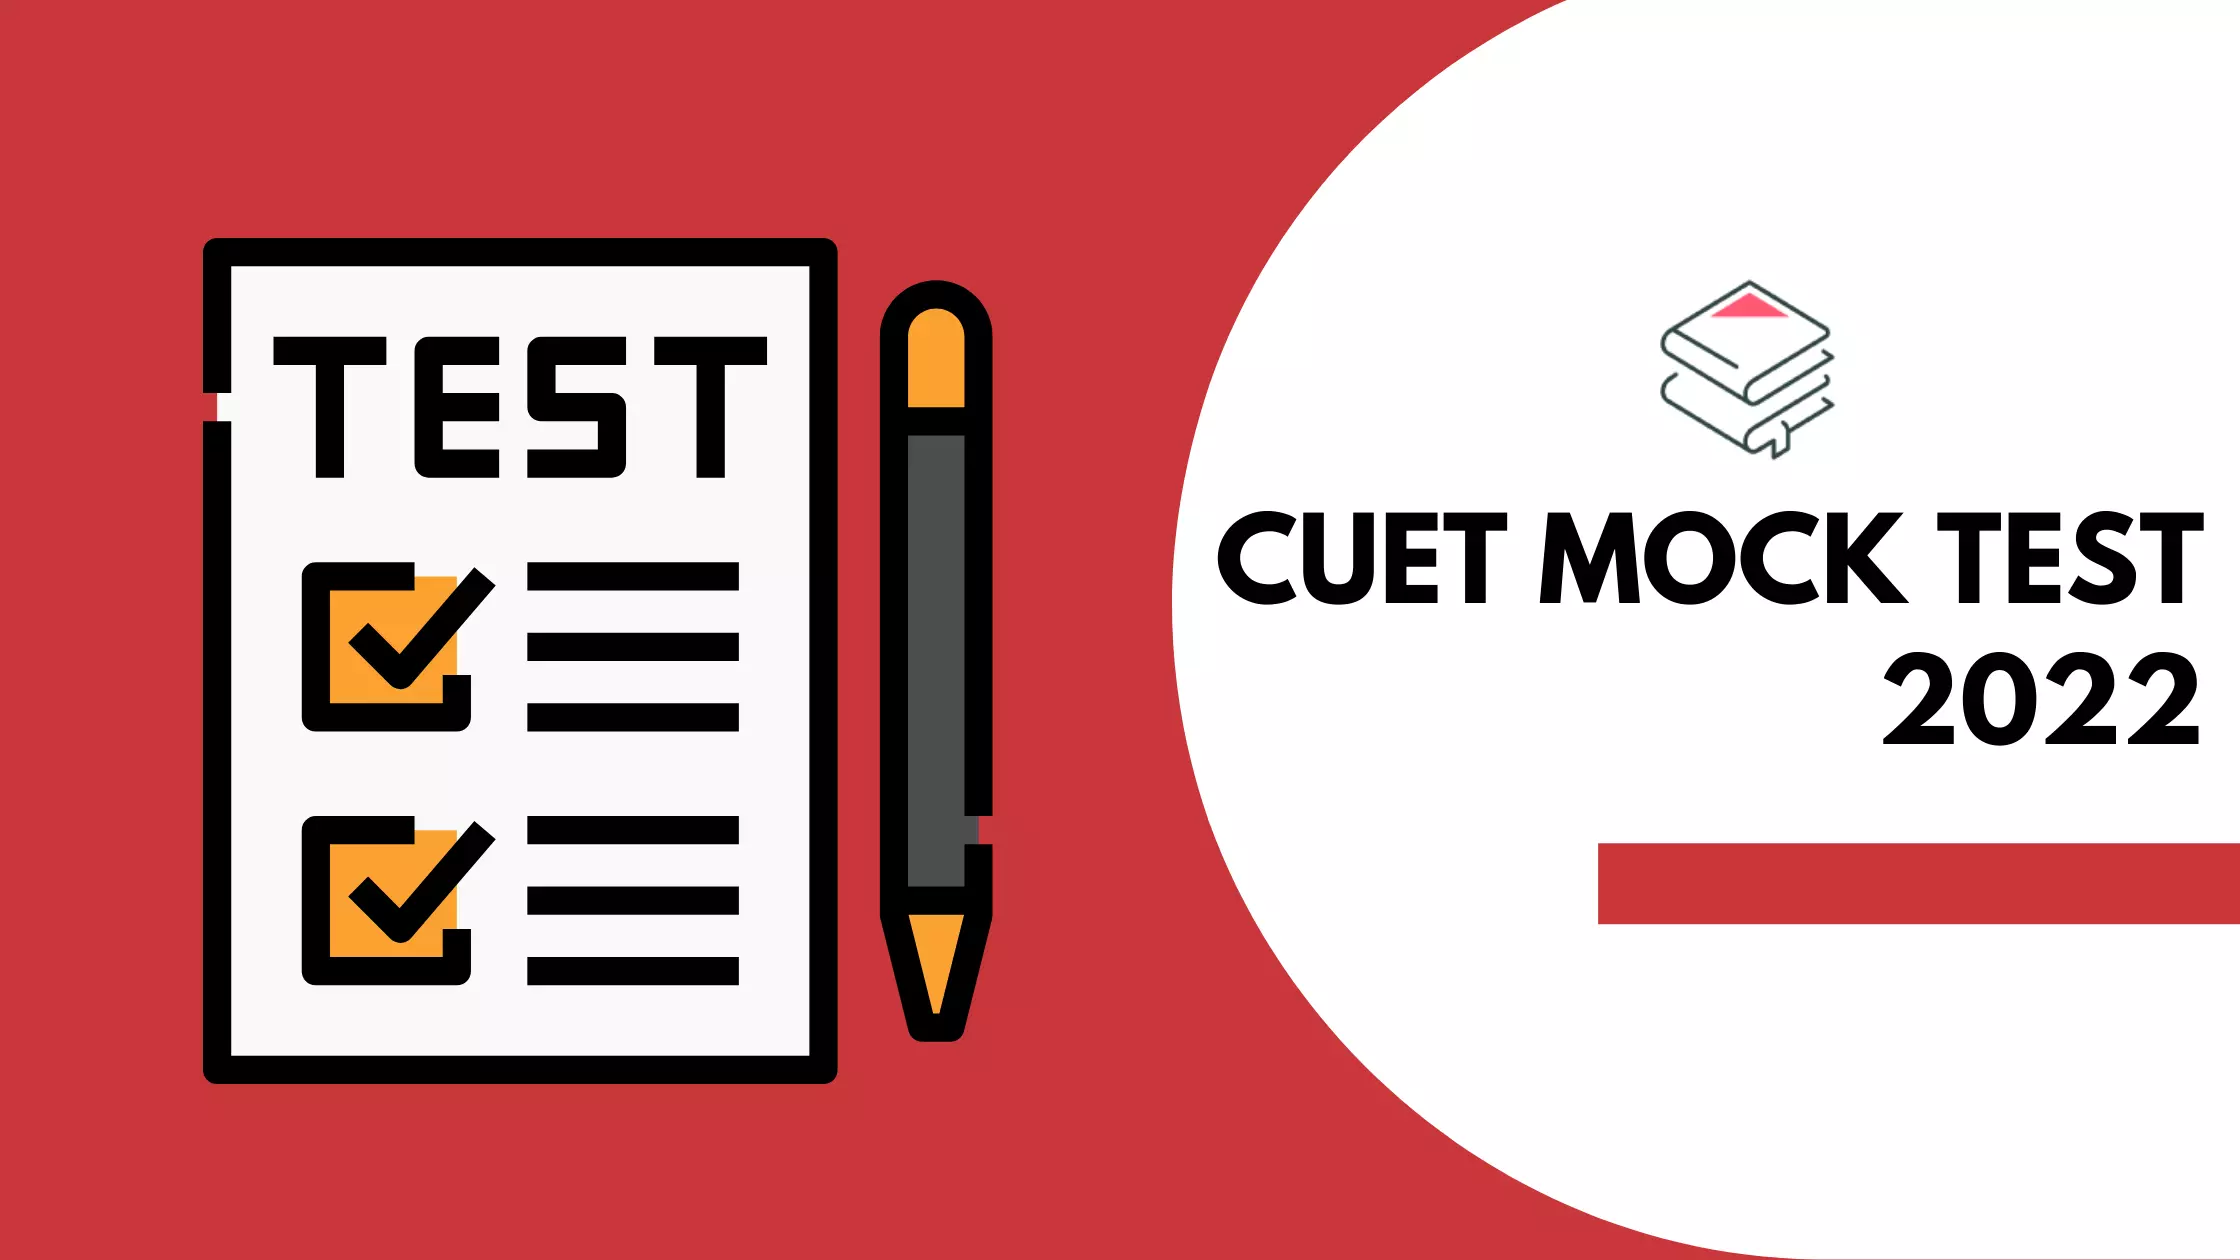 CUET Mock Test: Most used and effective tool to crack the exam